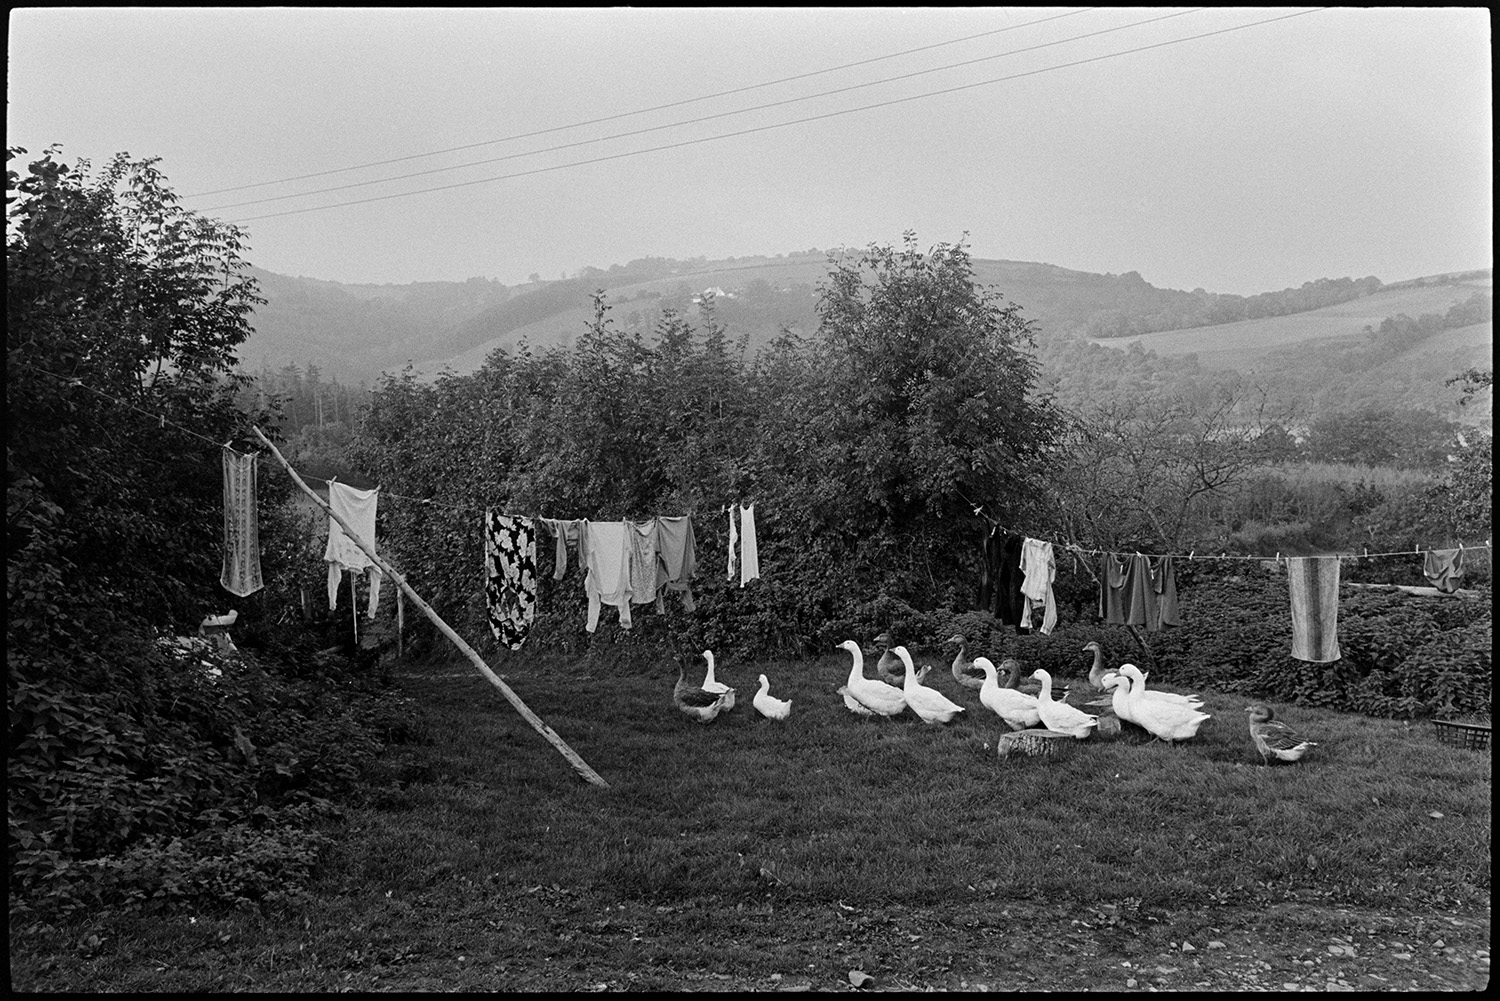 Clothes on washing line with geese. 
[A small flock of geese walking through a garden passing two washing lines with washing hung up to dry, possibly at Mariansleigh. Fields and trees are visible in the background.]